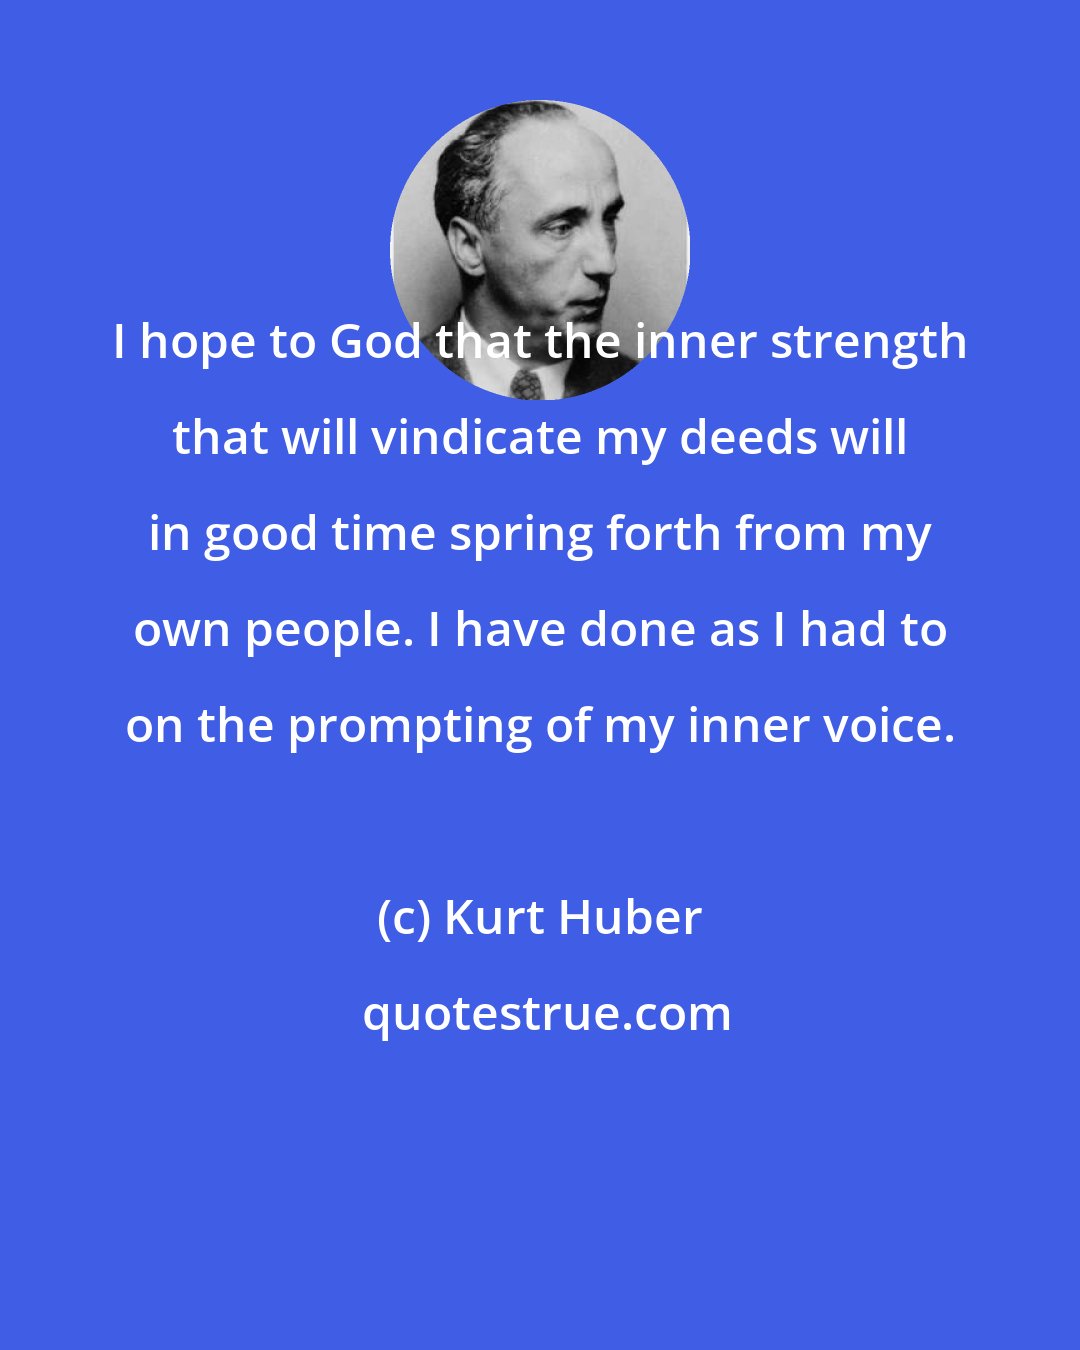 Kurt Huber: I hope to God that the inner strength that will vindicate my deeds will in good time spring forth from my own people. I have done as I had to on the prompting of my inner voice.